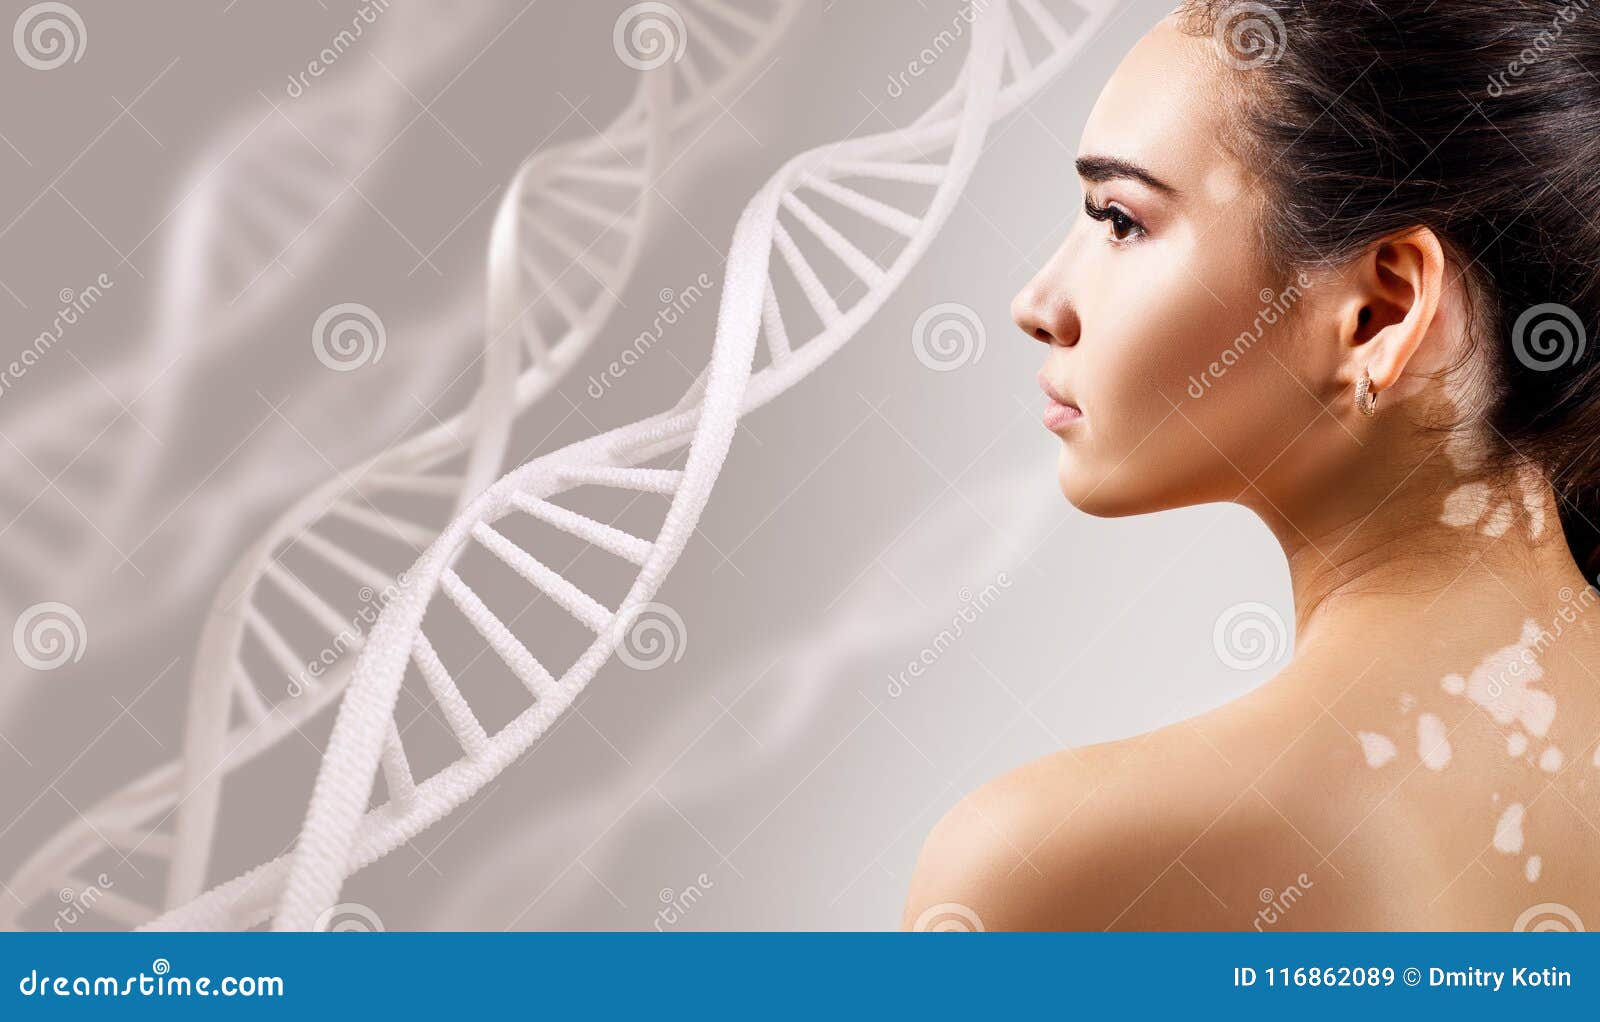 young sensual woman with vitiligo disease in dna chains.